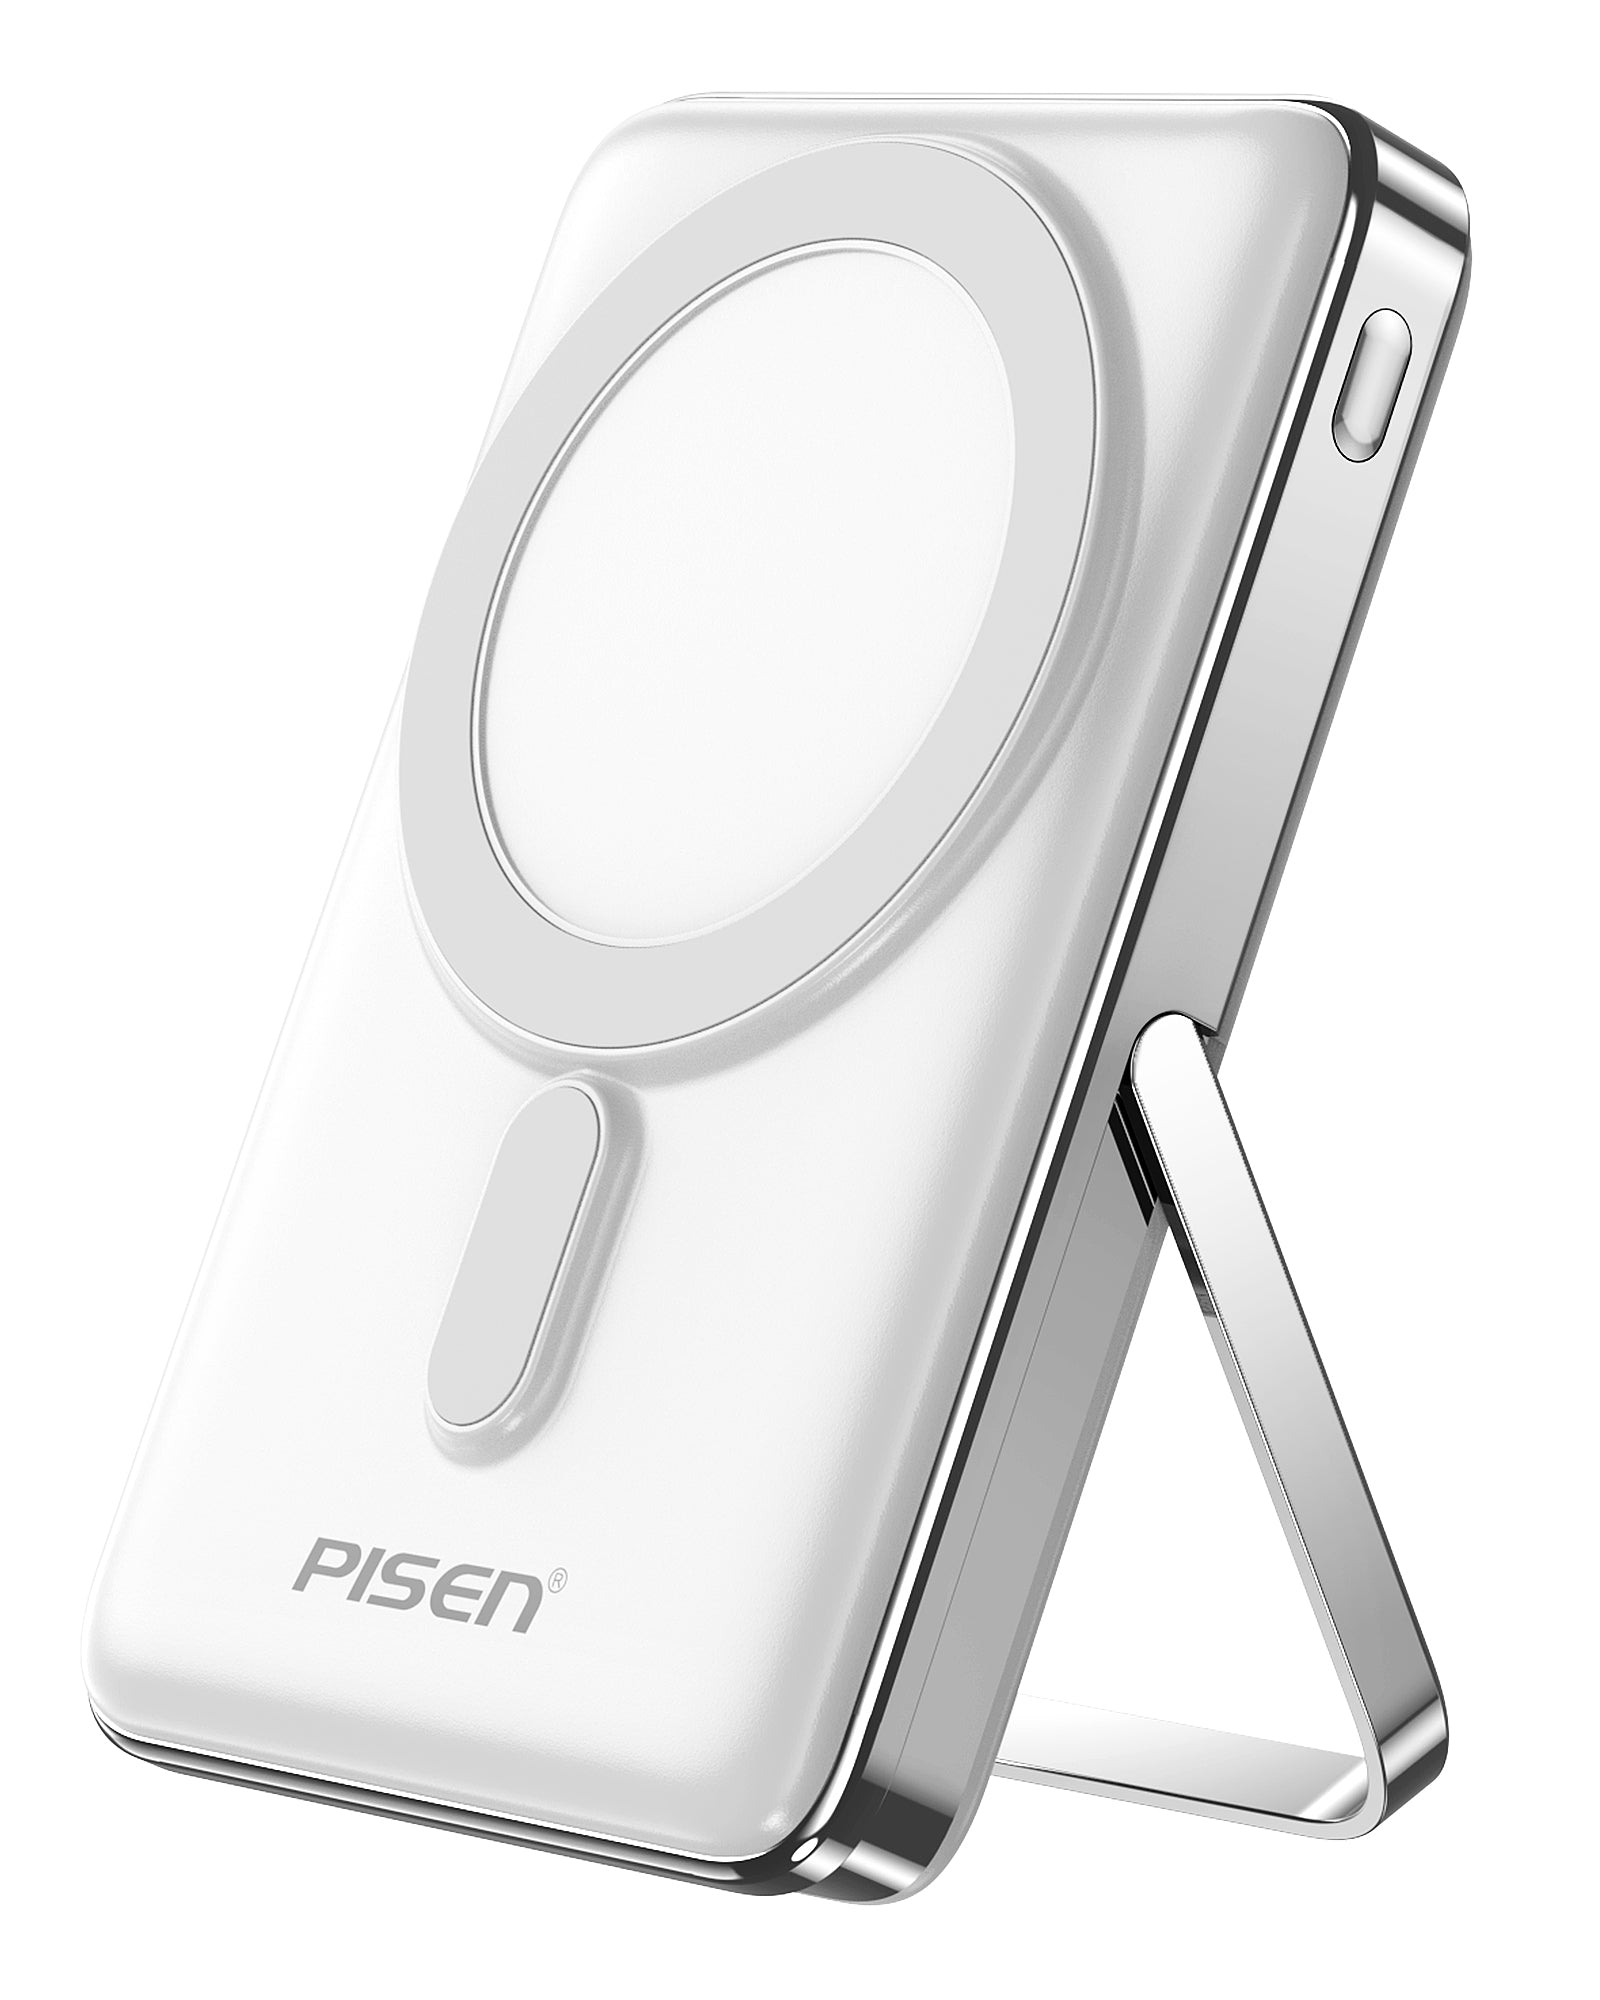 PISEN Magsafe Portable Power Bank - 10000mAh Wireless Foldable Charger, 30W PD Fast Charging Magnetic Battery Pack with Stand and LED Display, for iPhone 15/14/13/12 Pro/Pro Max/Plus/Mini Series and more